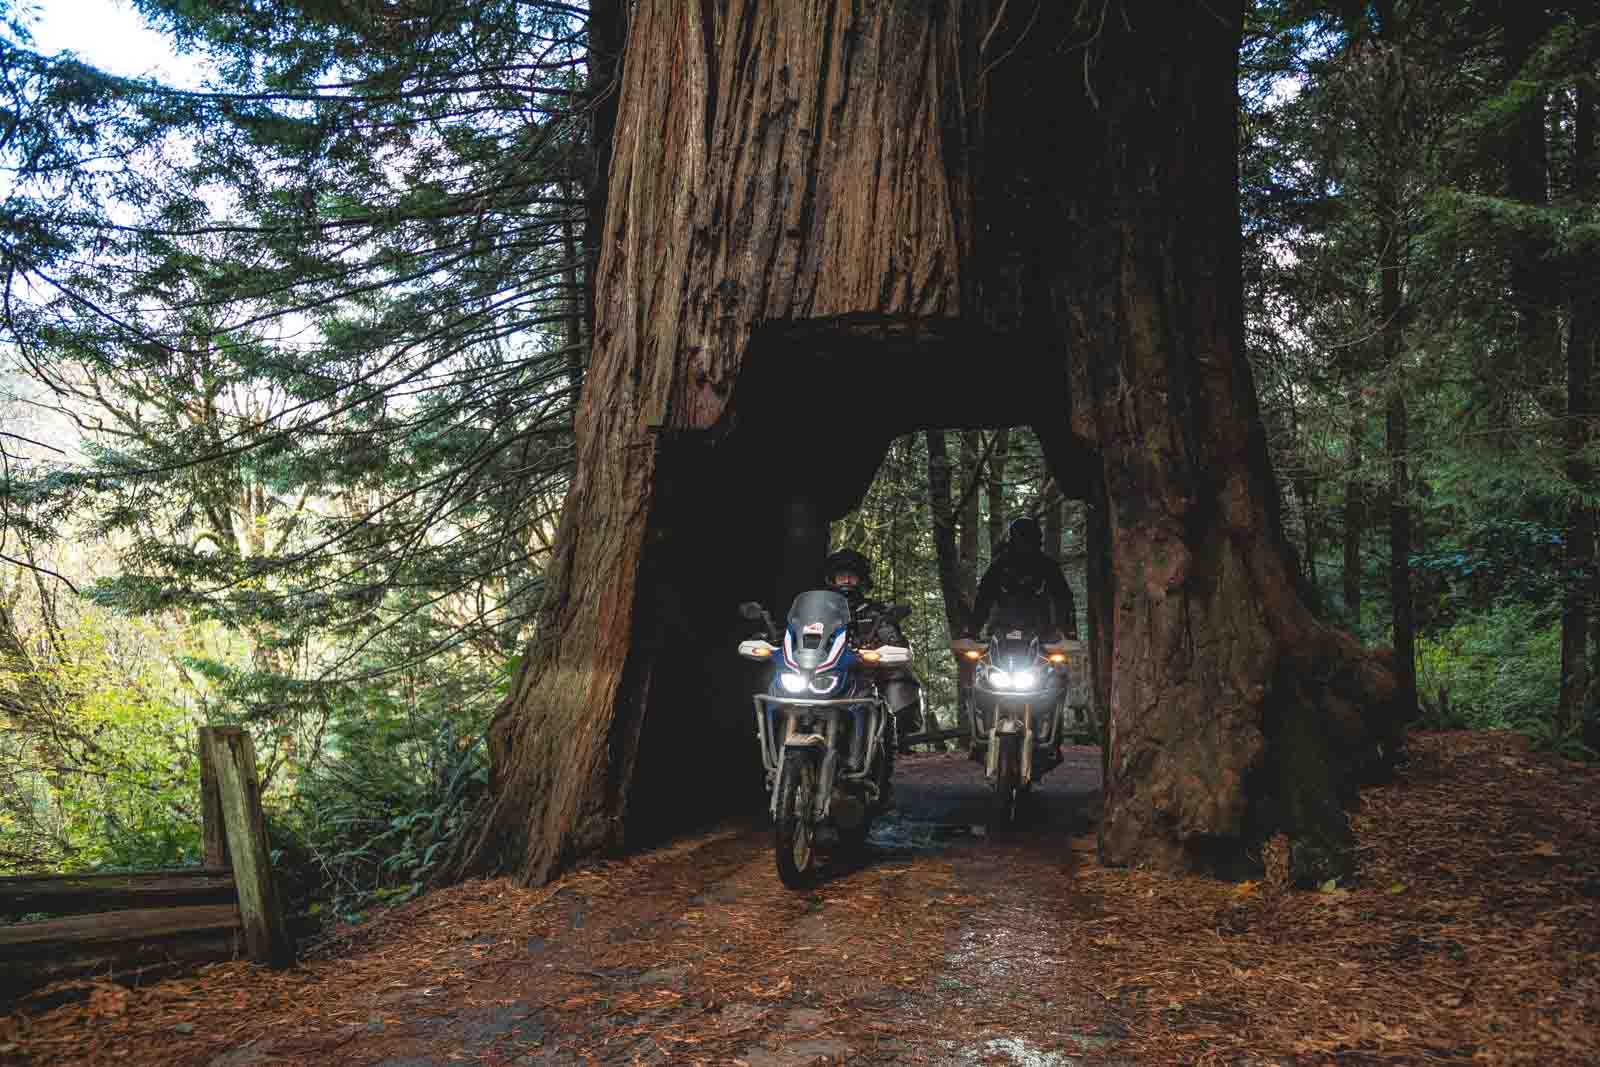 motorcycling-redwoods-drive-thru-tree-on-the-pacific-coast-highway-adventure-motorcycle-tour